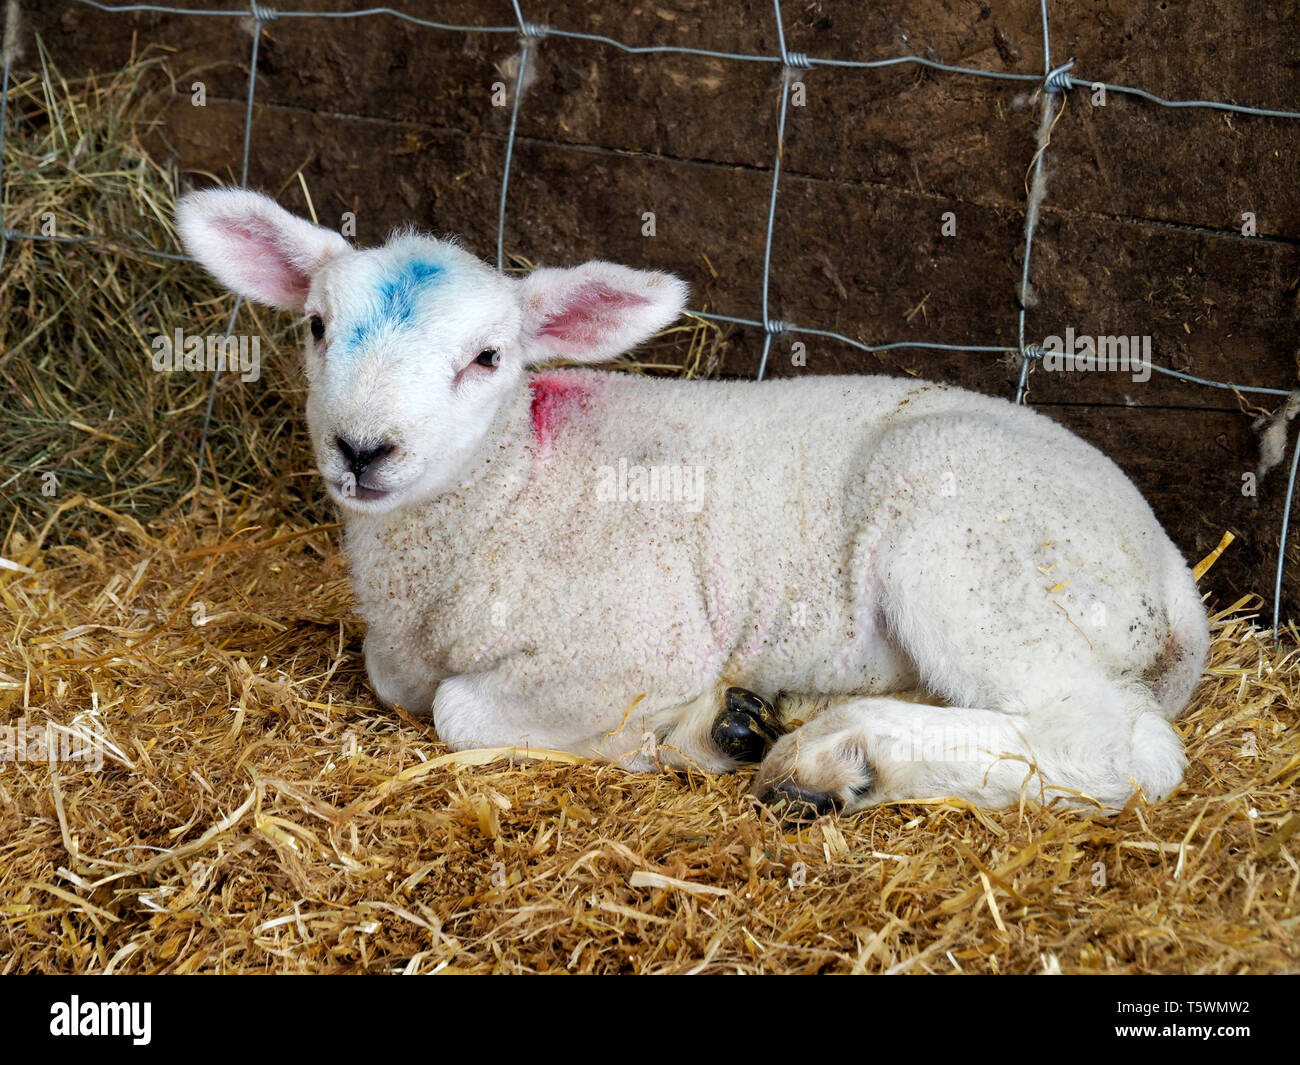 Young lamb lying on straw in a barn during lambing season. Barn lambing is easier for the farmer and provides better protection for the lambs. Stock Photo